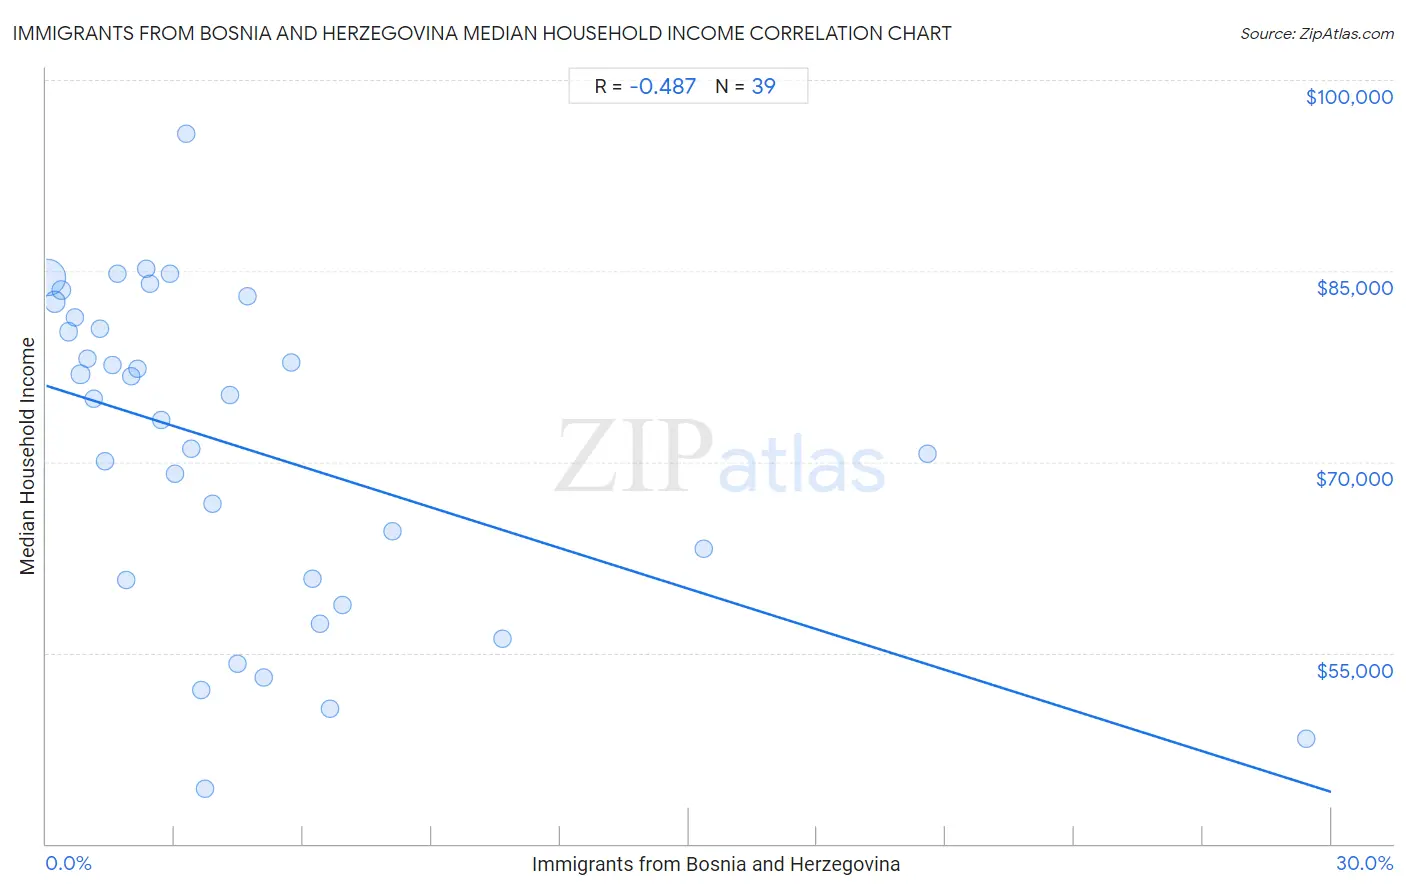 Immigrants from Bosnia and Herzegovina Median Household Income